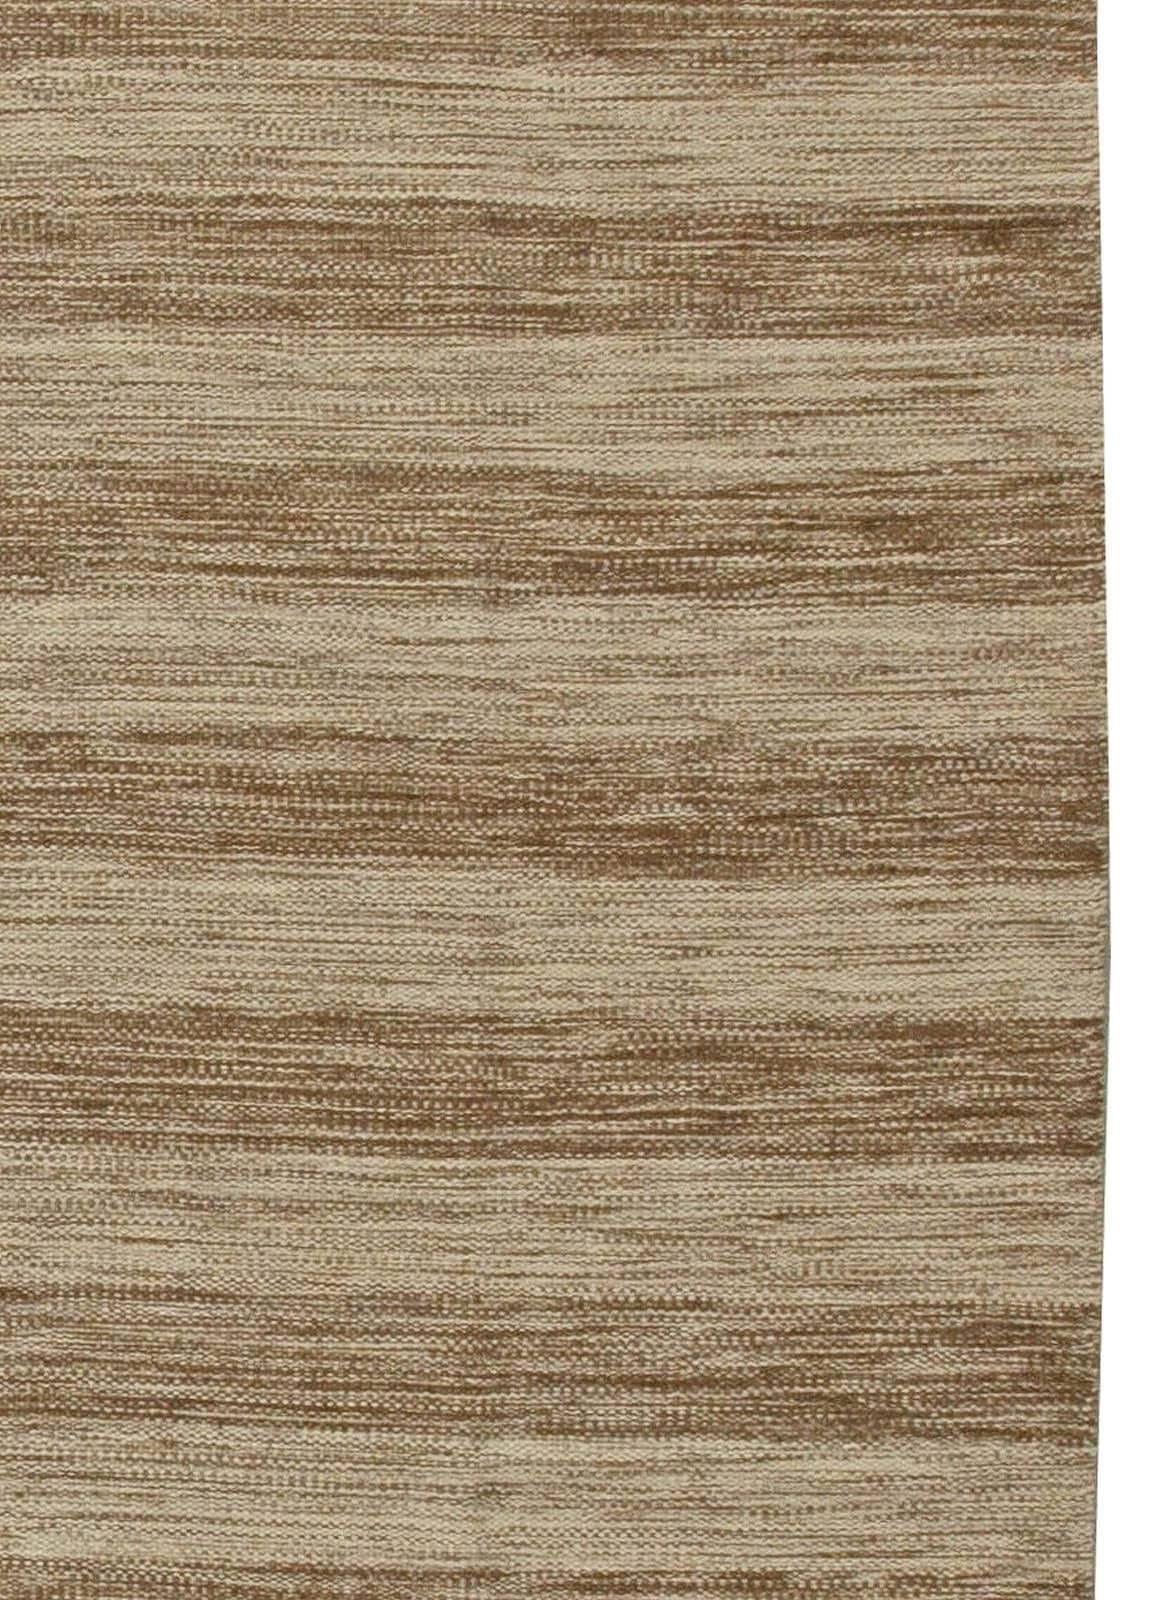 Contemporary Striped Brown and Beige Flat-Weave Wool Rug by Doris Leslie Blau For Sale 1